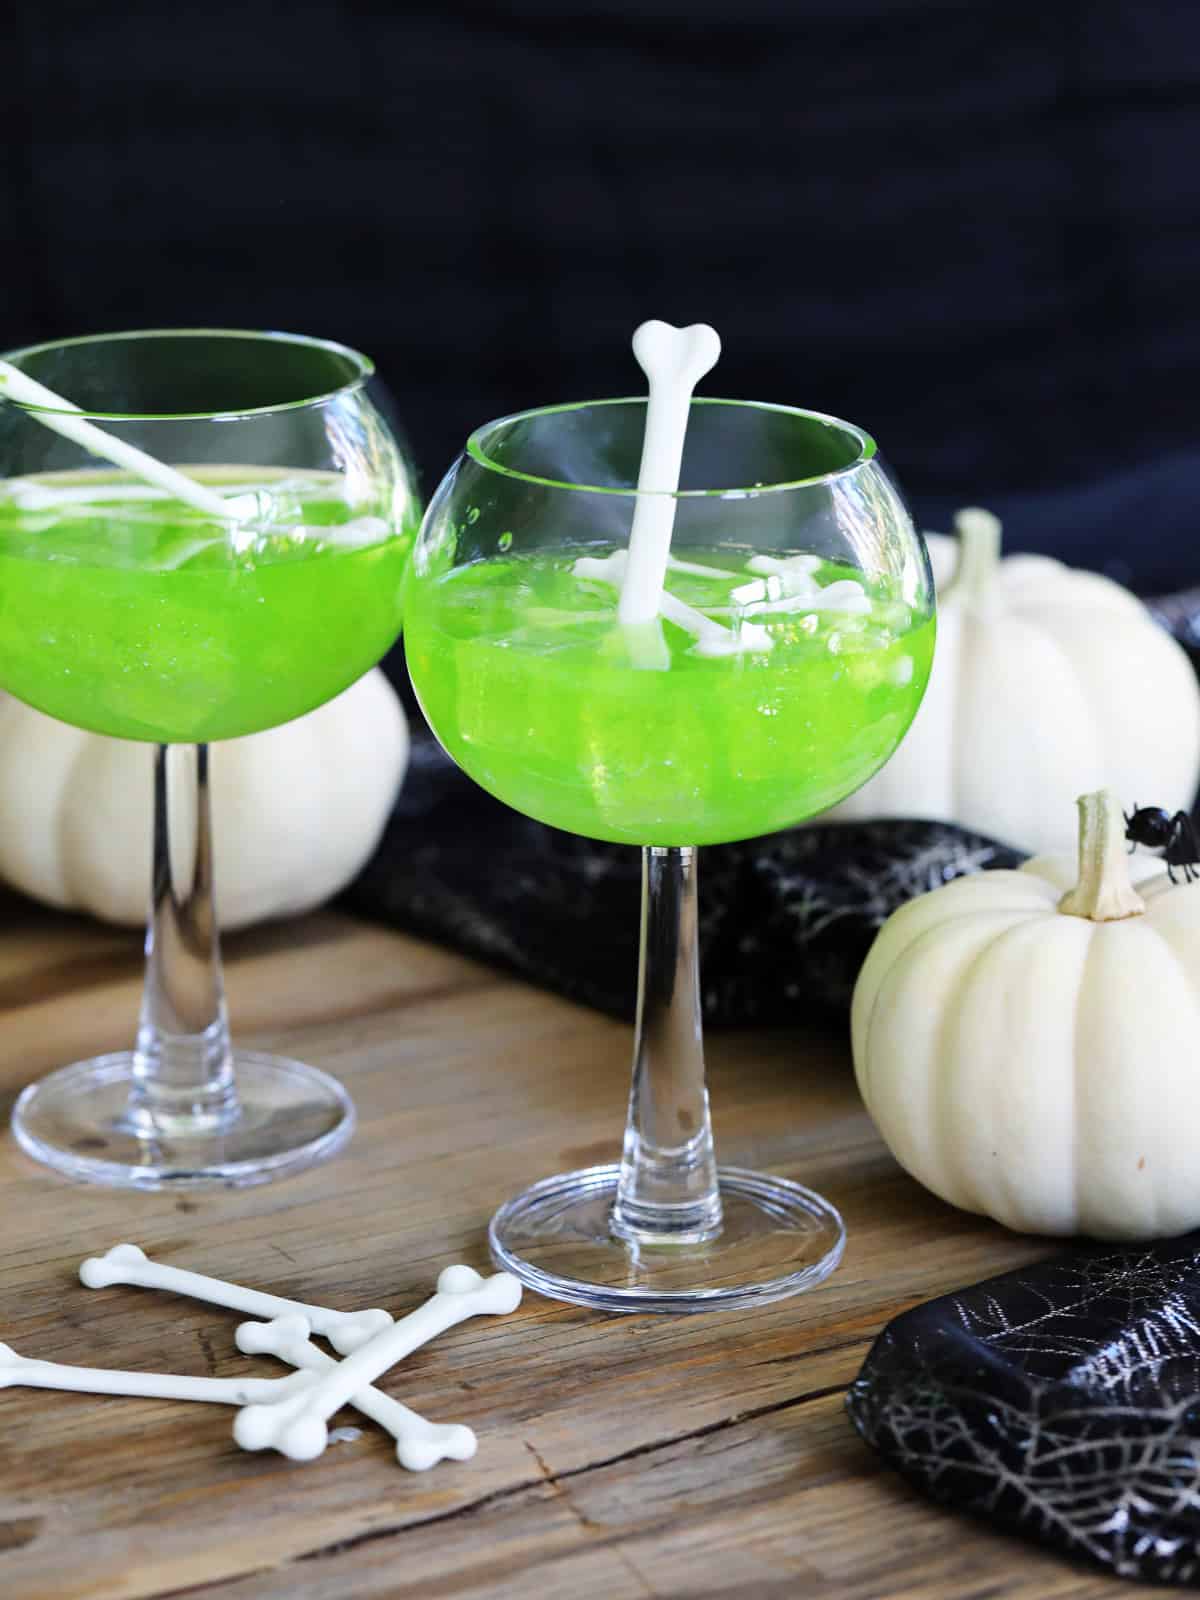 https://www.delicioustable.com/wp-content/uploads/2022/09/Wiches-brew-midori-sour-cocktails-with-white-bones-for-garnish-1.jpg